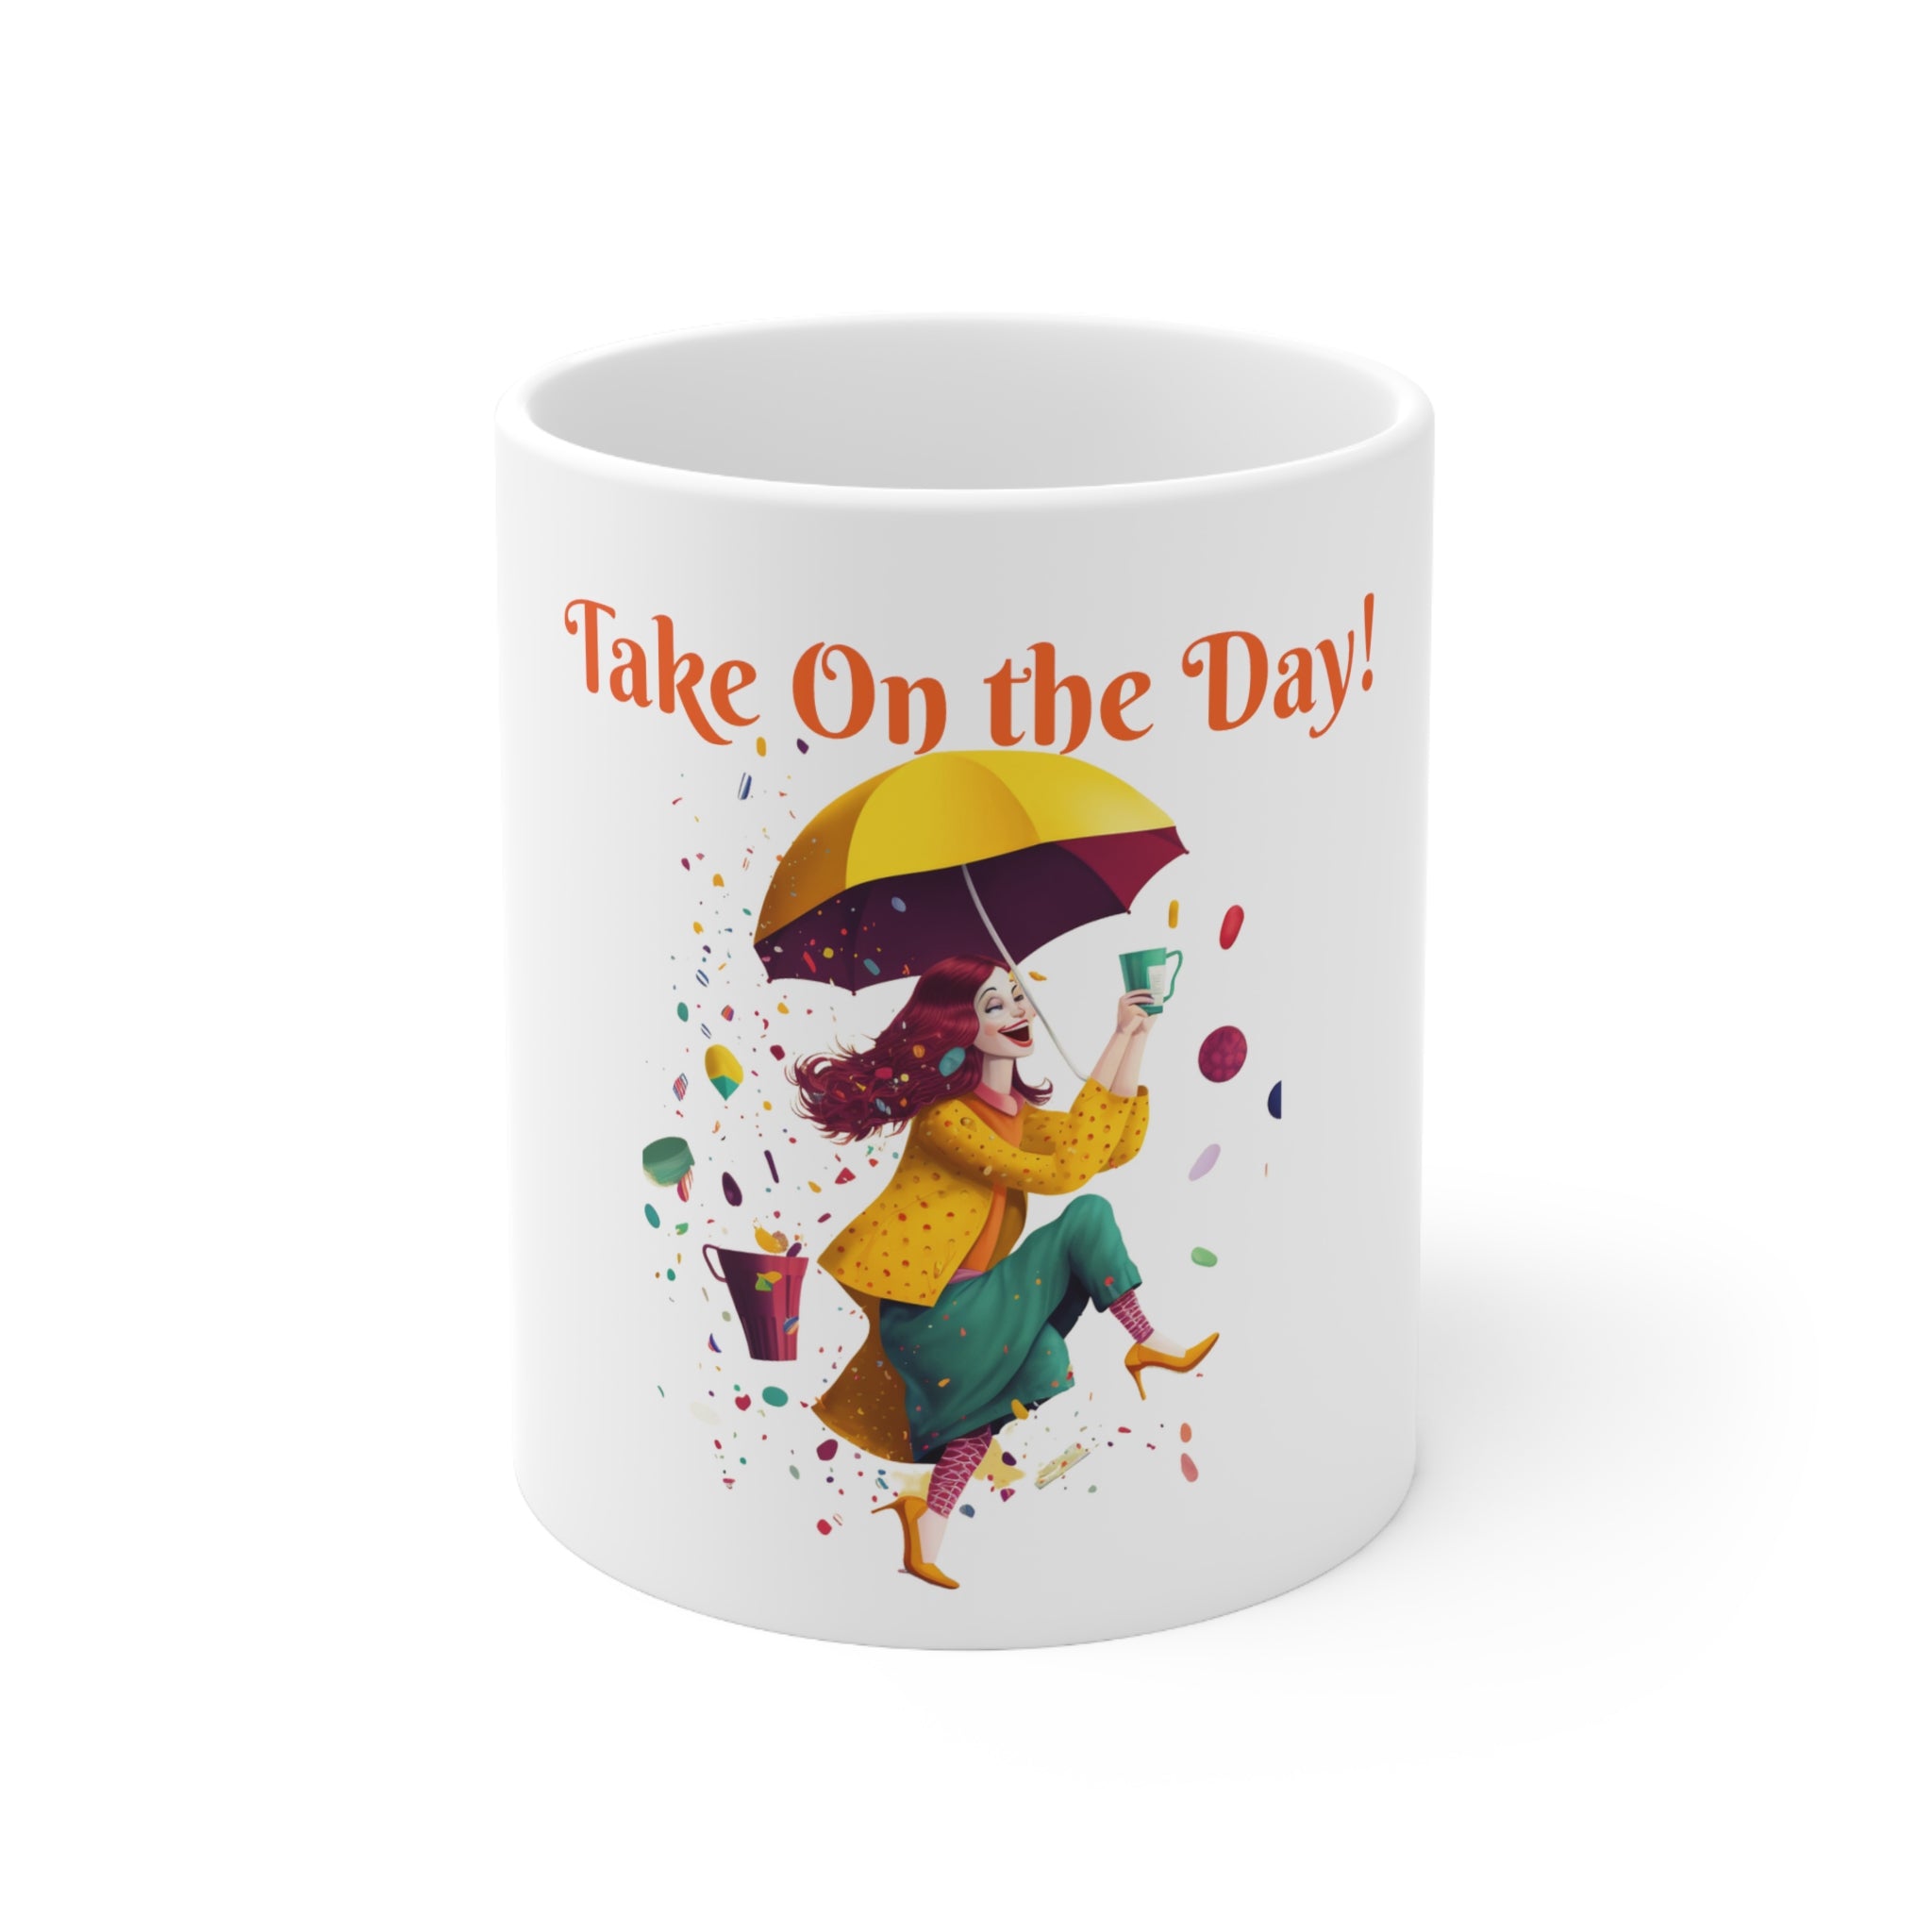 Cute Coffee Mug/ Cup With Happy Teacher With Her Cute Yellow Umbrella Celebrating a Cup of Hot Starbucks Coffee to Start the Day on a Rainy Morning.